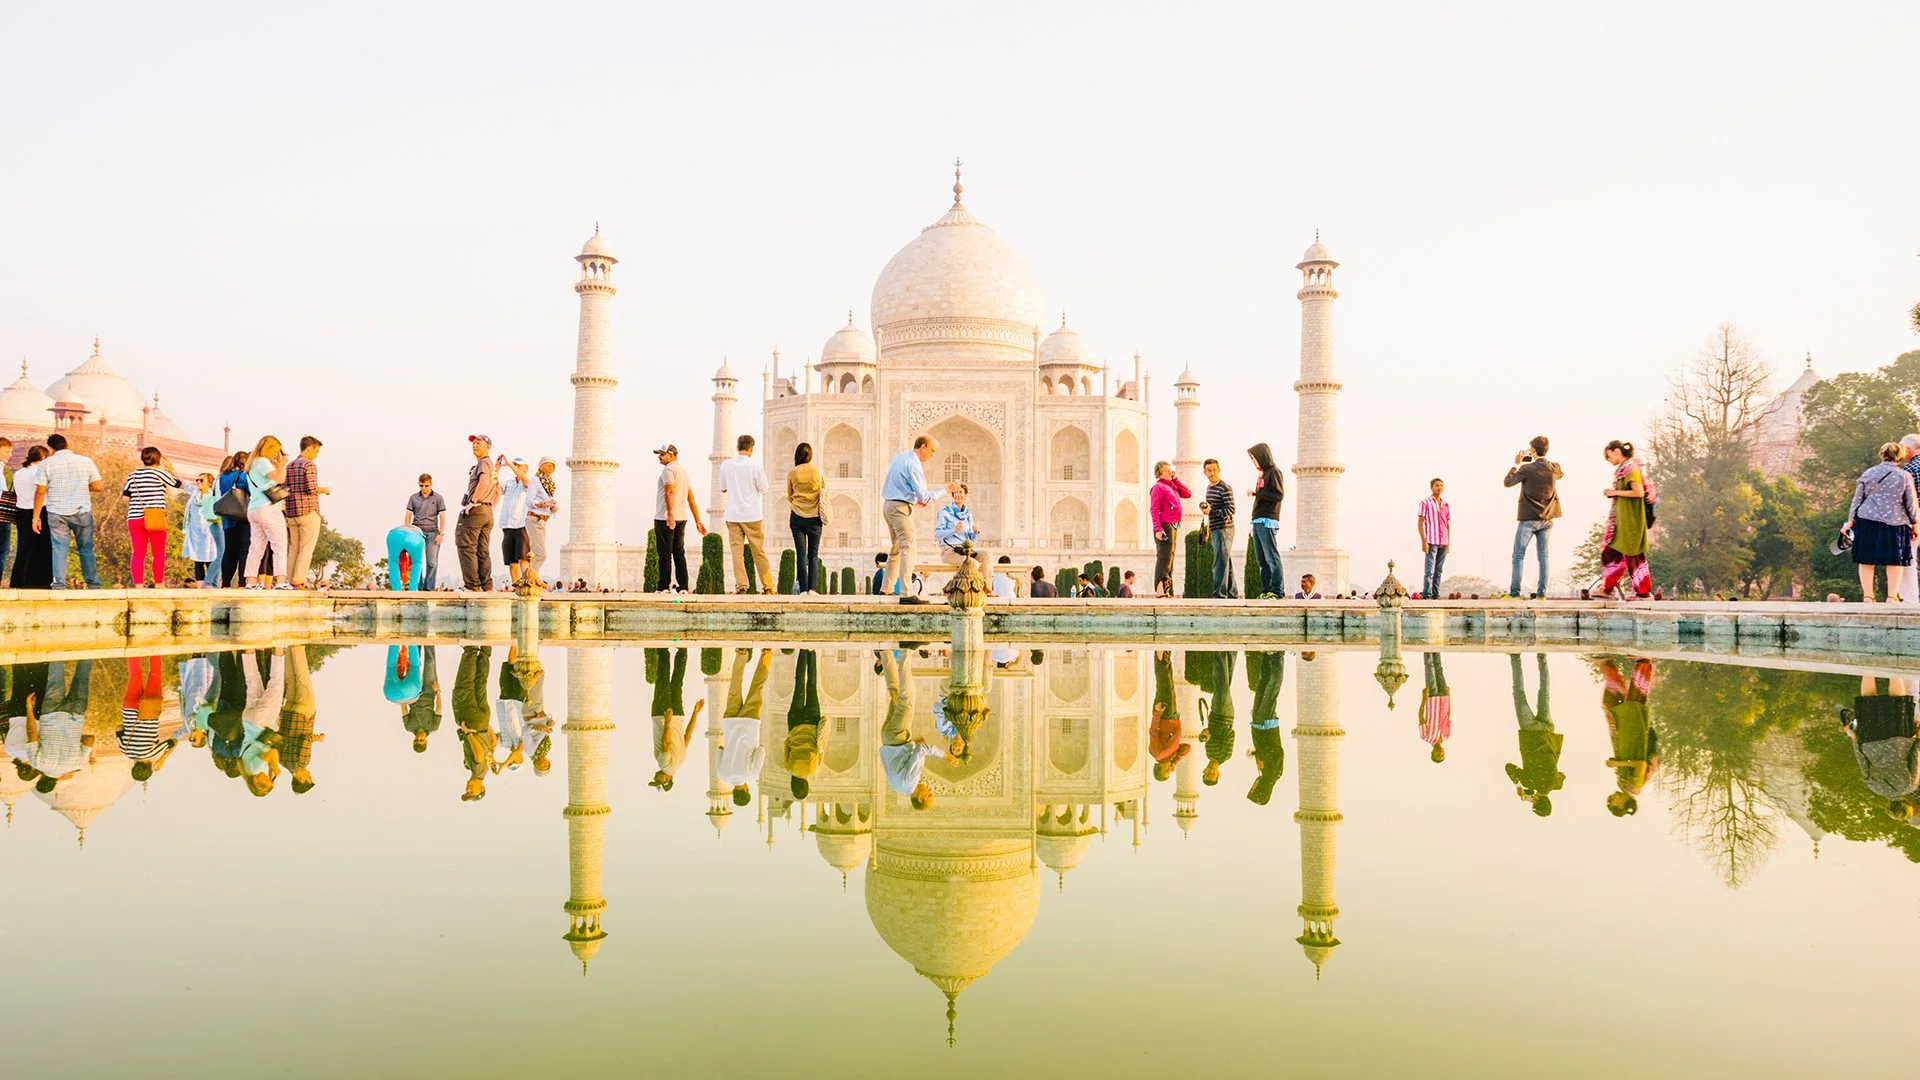 Agra: Wonders and Monuments of the Mughal Legacy